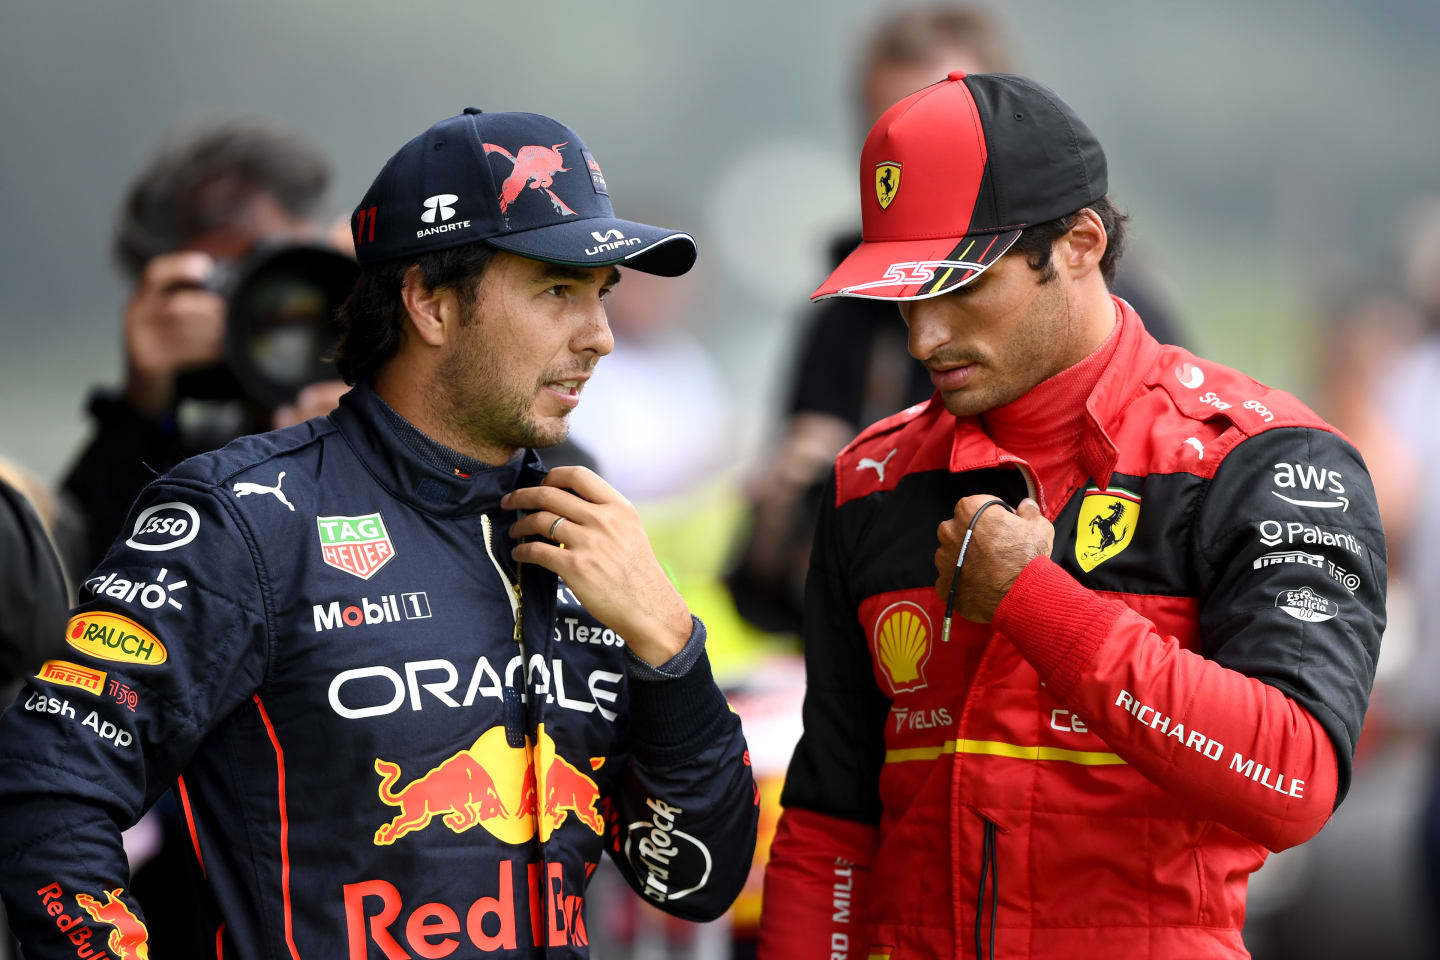 SPA, BELGIUM - AUGUST 27: Second placed qualifier Carlos Sainz of Spain and Ferrari and Third